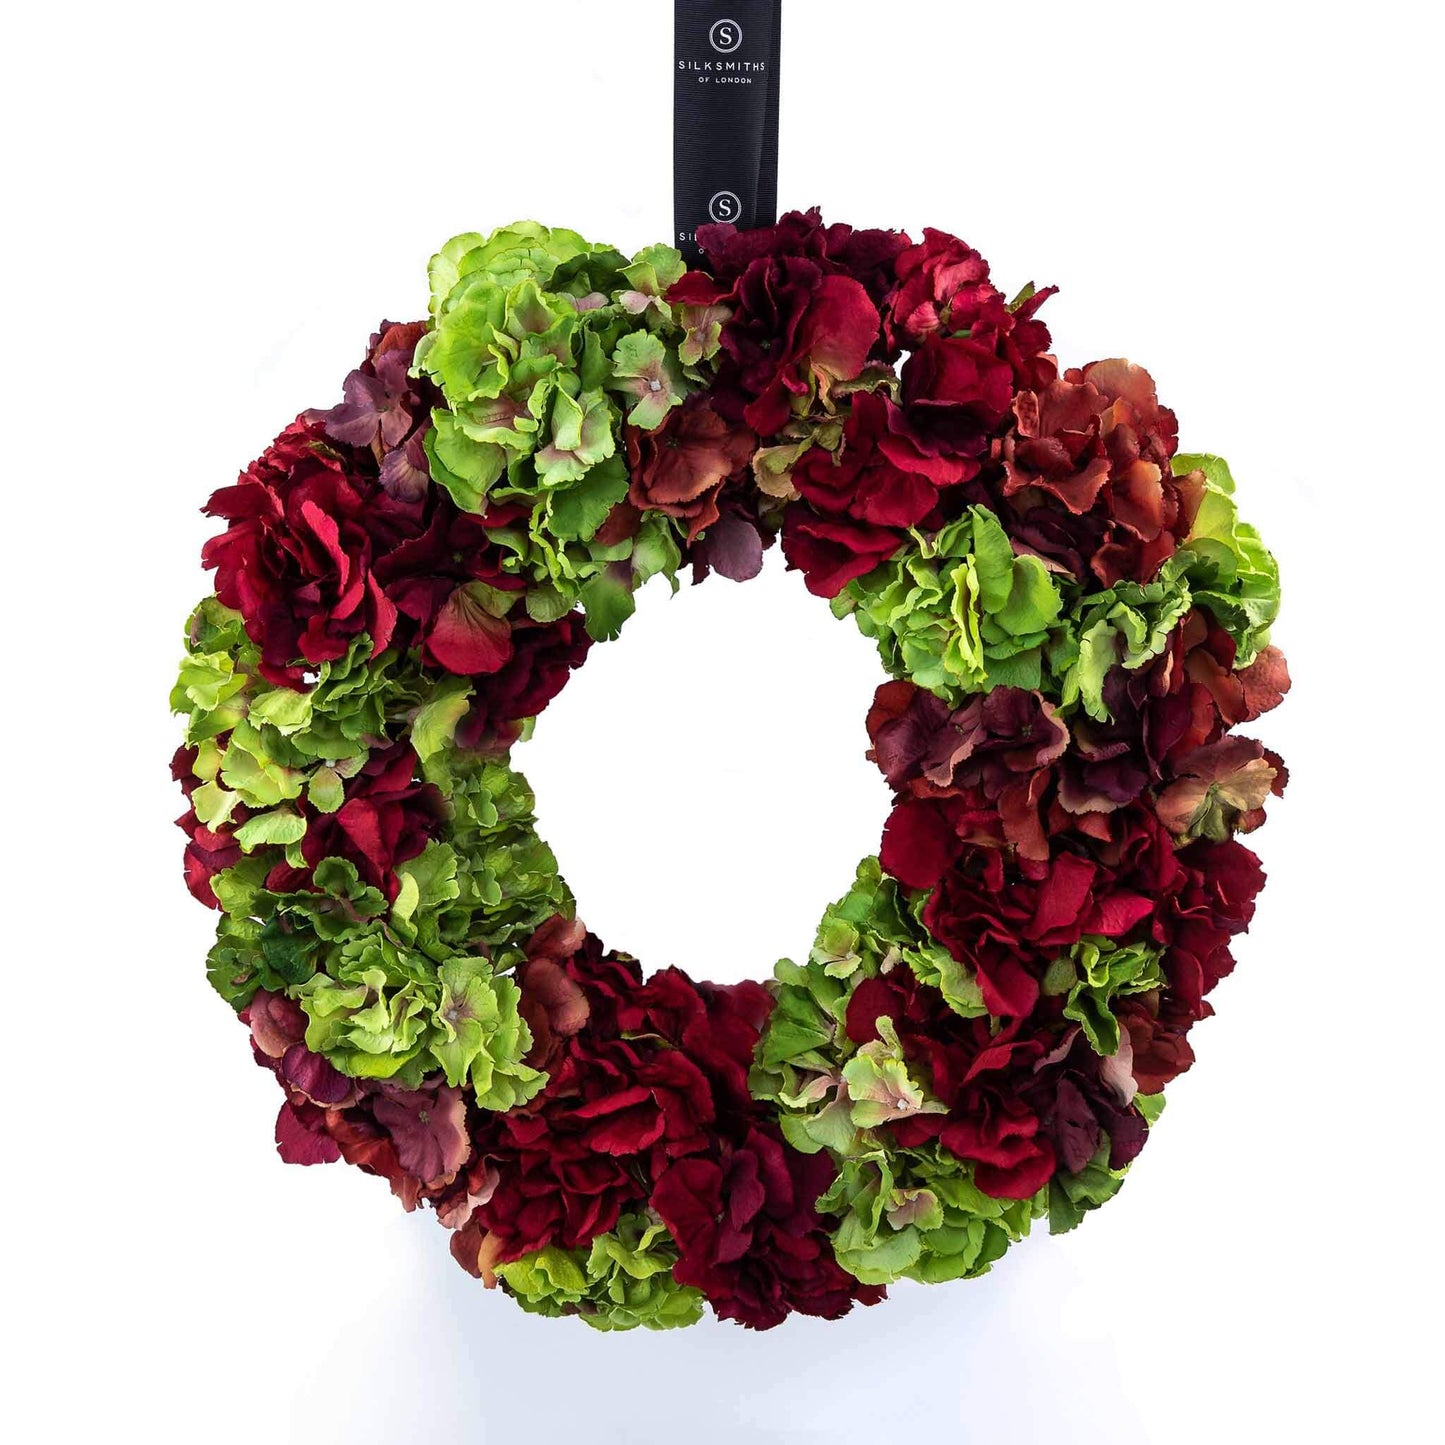 Red and green faux hydrangea wreath with sash